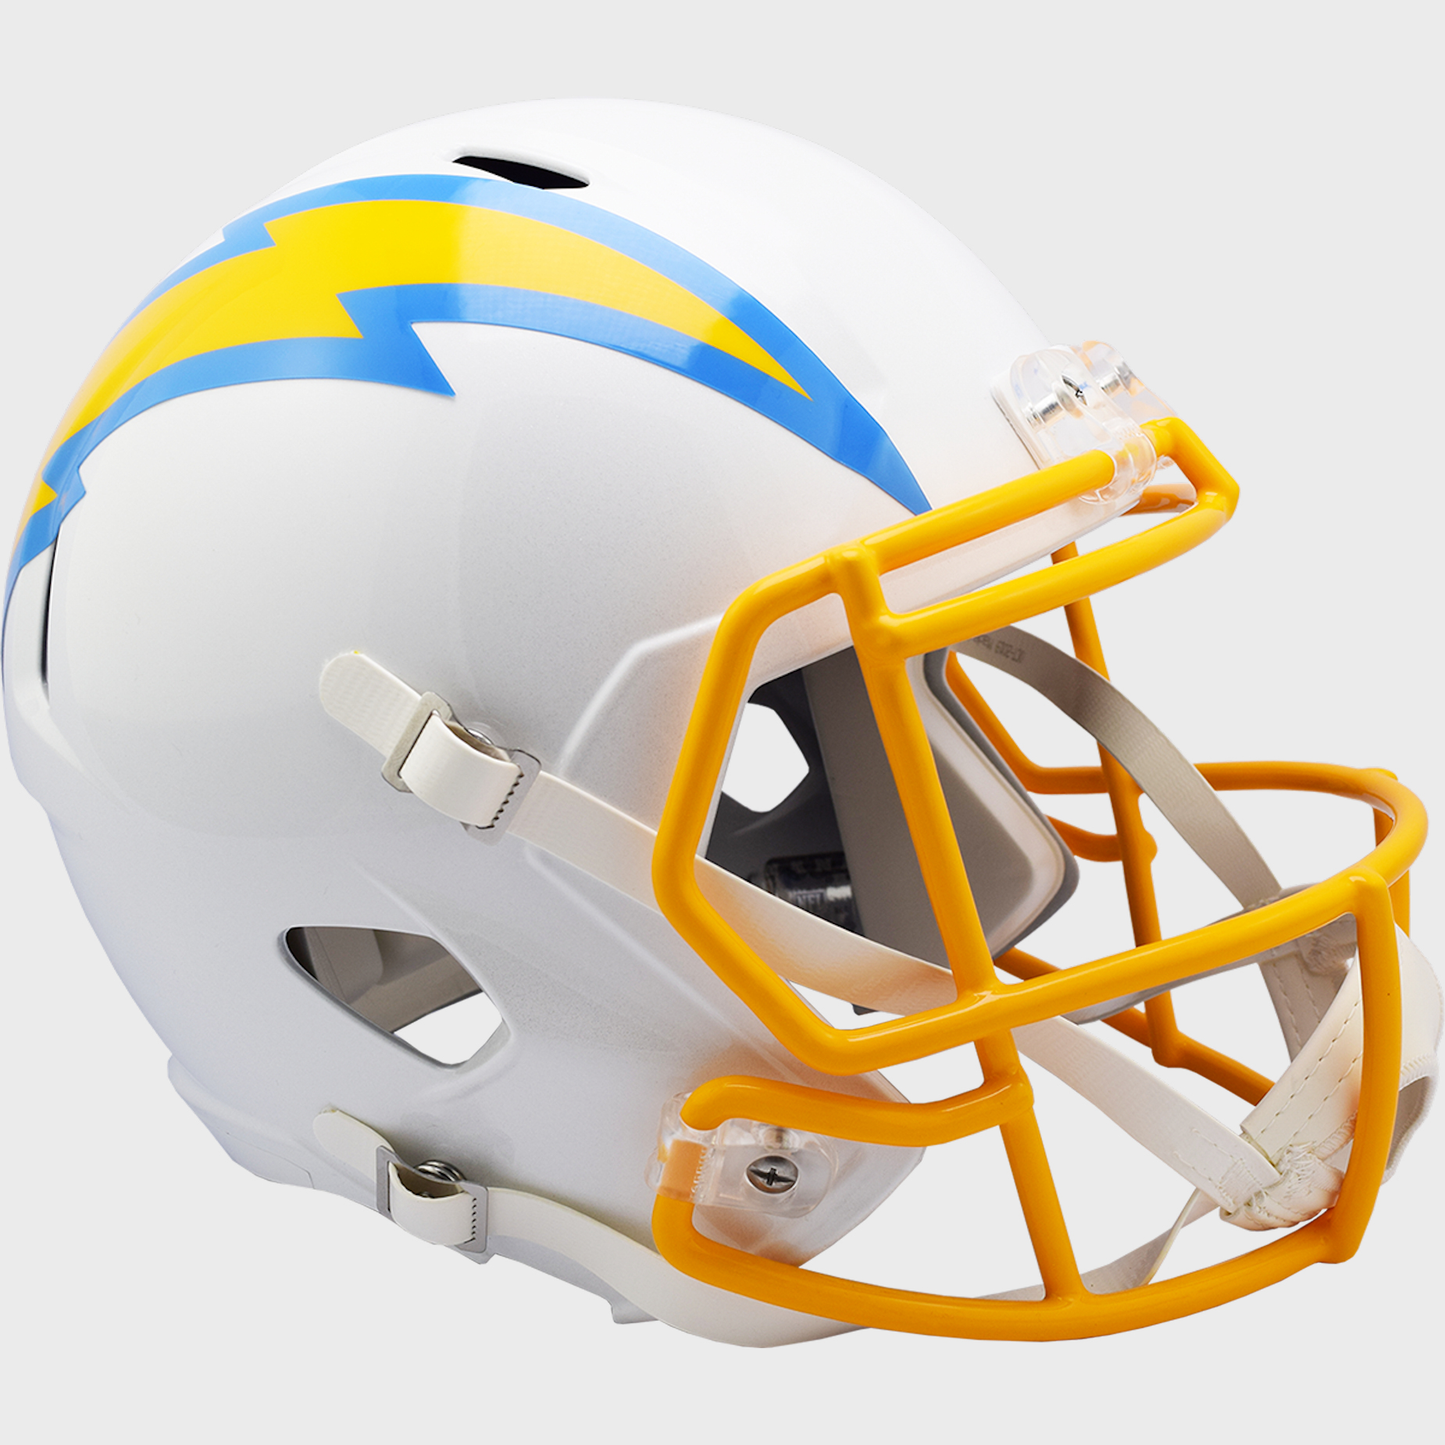 Los Angeles Chargers full size replica helmet